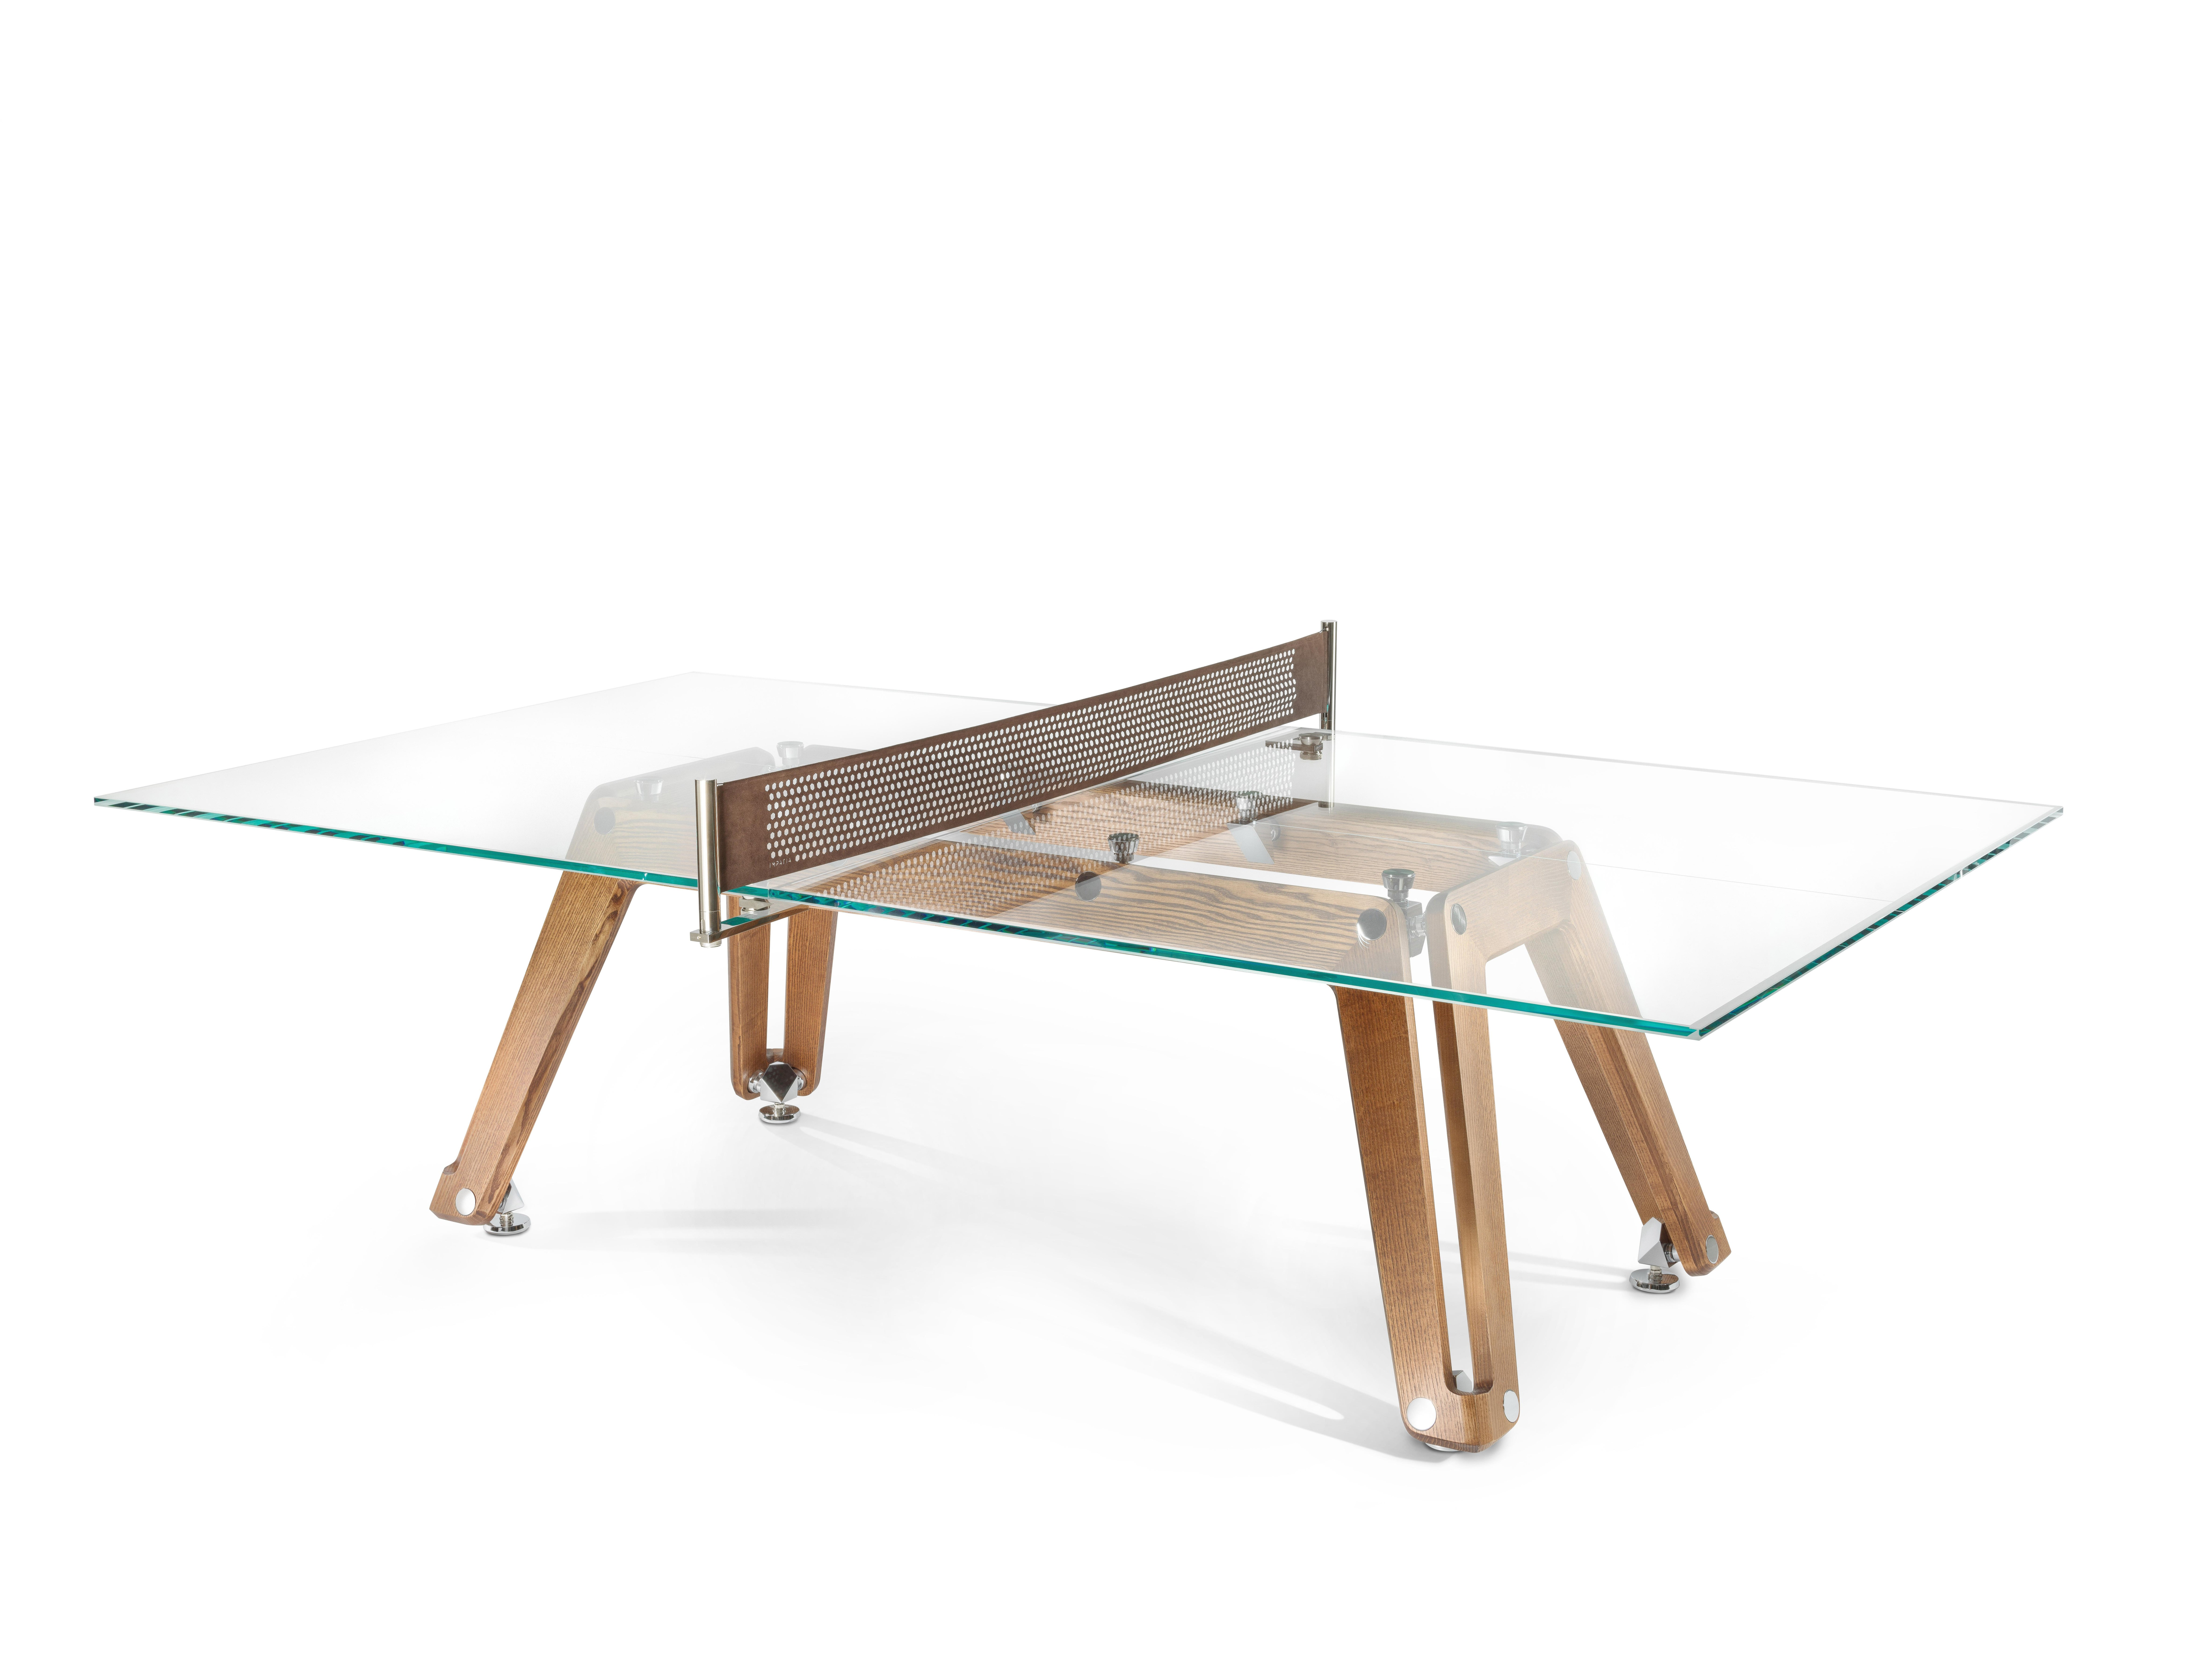 Lungolinea wood table tennis by Impatia
Dimensions: D274 x W152.5 x H76 cm
Weight: 220 kg
Material: Top in Low-iron glass,Base in wood,Polished metal components,Chrome connecting joints
Also Available: Different Colours and Materials.

The